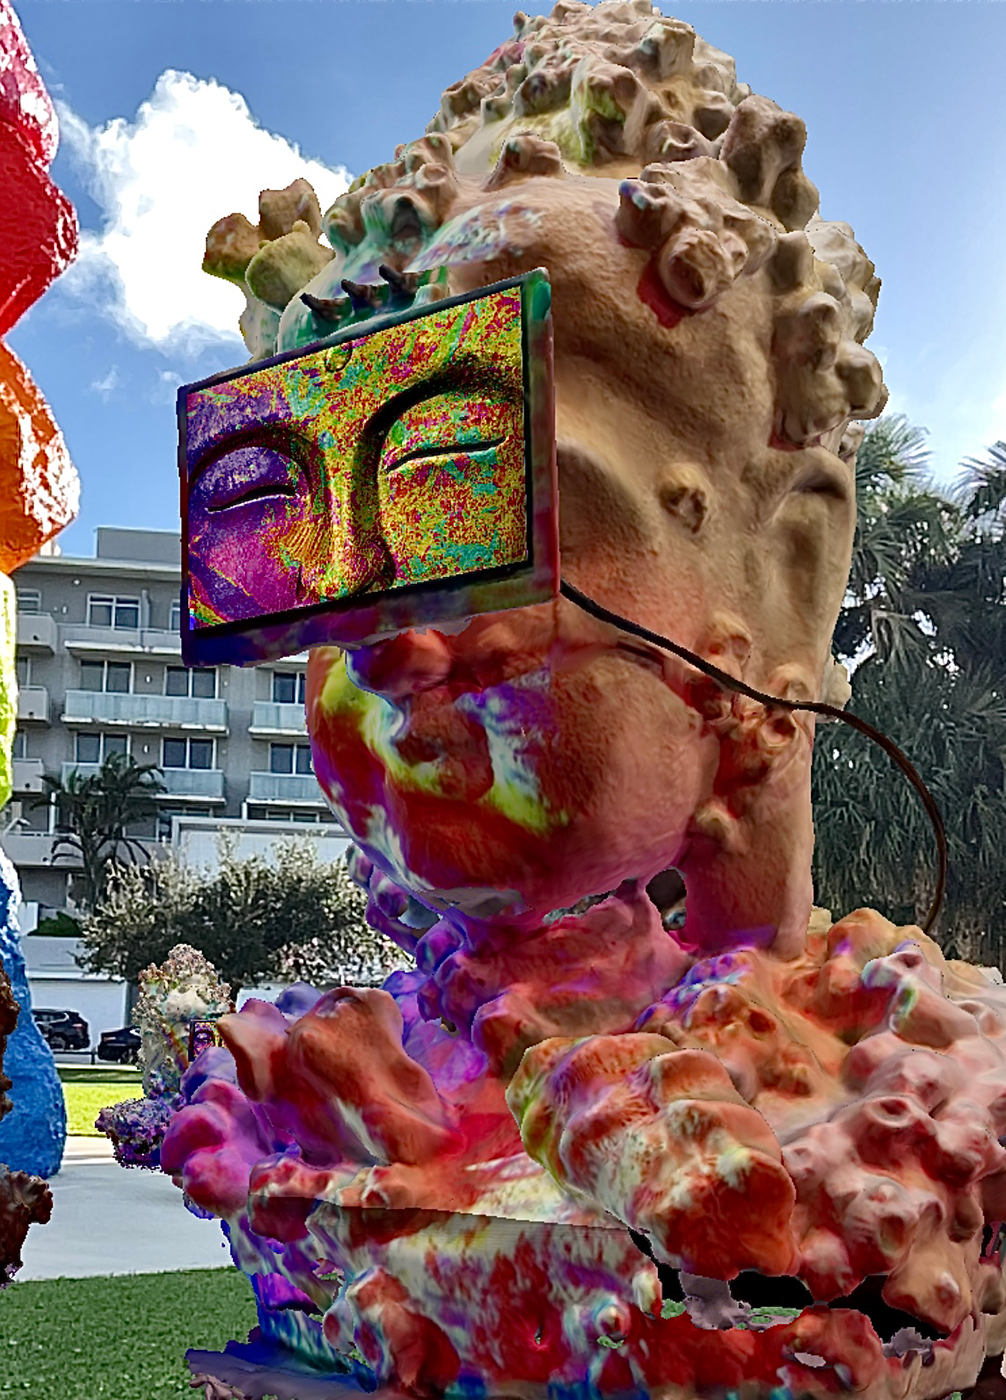 AR_TVBuddha "An interactive, geospatial, location-based Augmented Reality project"